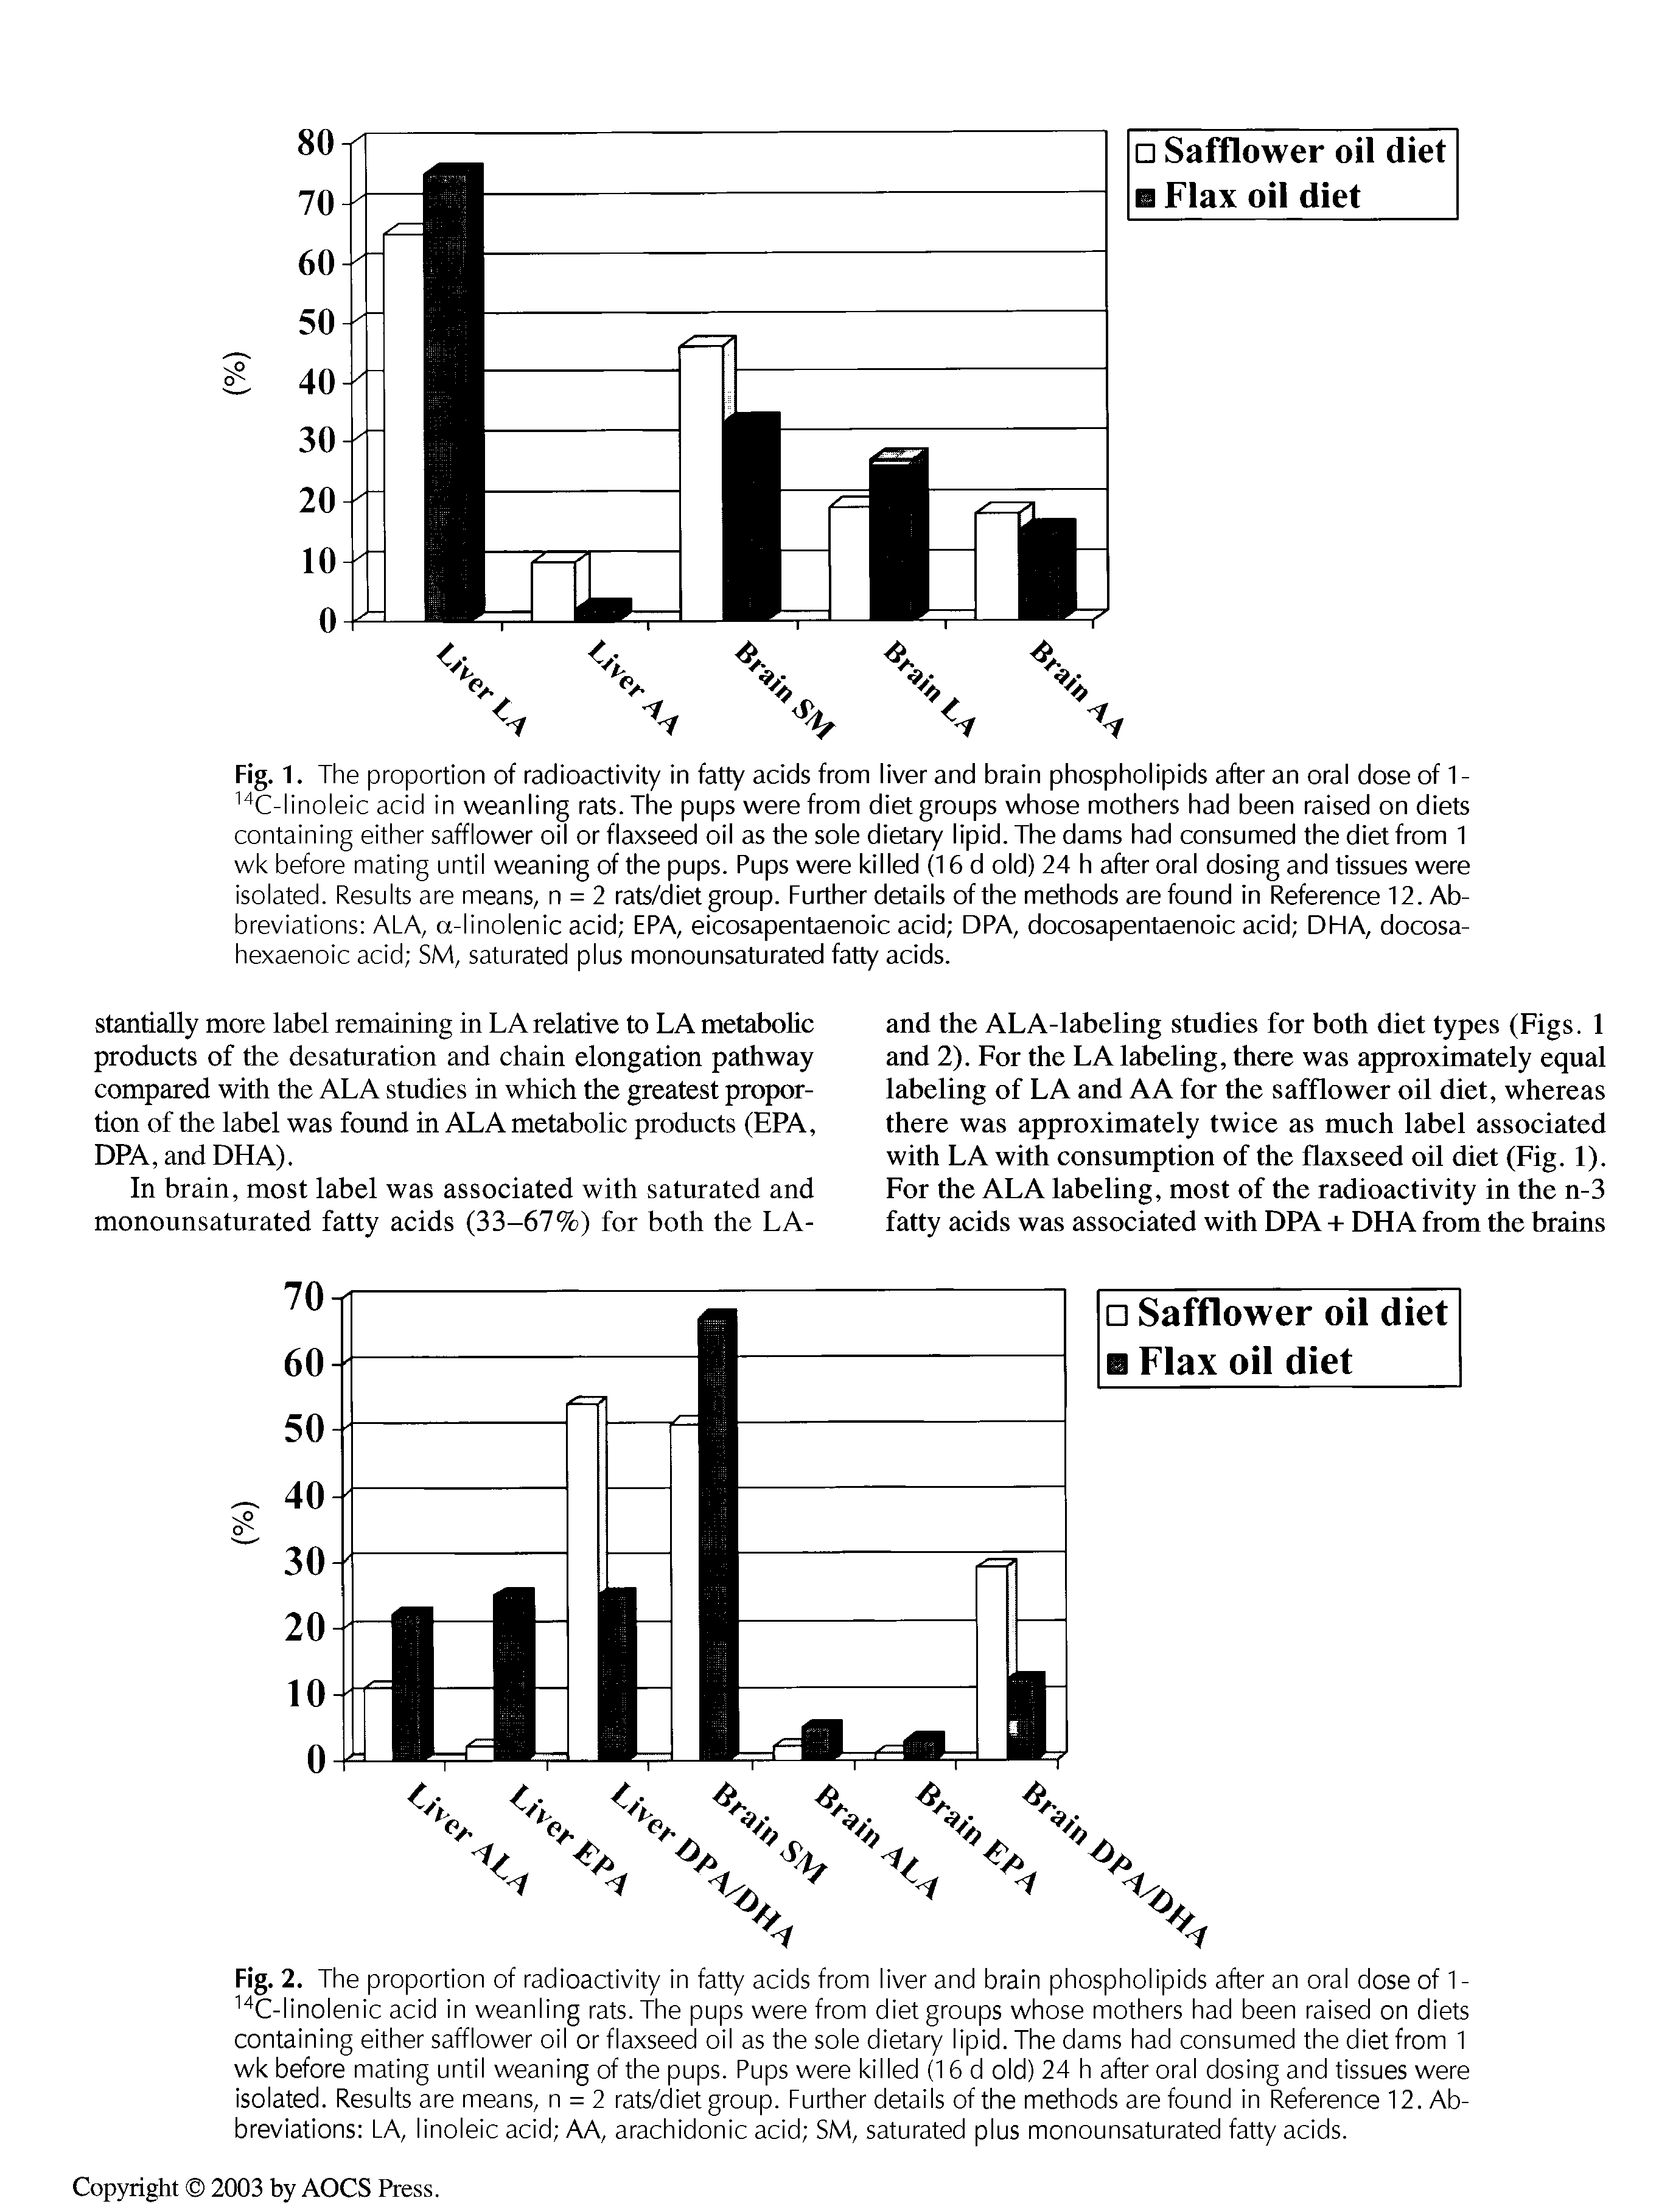 Fig.1. The proportion of radioactivity in fatty acids from liver and brain phospholipids after an oral dose of 1- X-linoleic acid in weanling rats. The pups were from diet groups whose mothers had been raised on diets containing either safflower oil or flaxseed oil as the sole dietary lipid. The dams had consumed the diet from 1 wk before mating until weaning of the pups. Pups were killed (16 d old) 24 h after oral dosing and tissues were isolated. Results are means, n = 2 rats/diet group. Further details of the methods are found in Reference 12. Abbreviations ALA, a-linolenic acid EPA, eicosapentaenoic acid DPA, docosapentaenoic acid DHA, docosa-hexaenoic acid SM, saturated plus monounsaturated fatty acids.